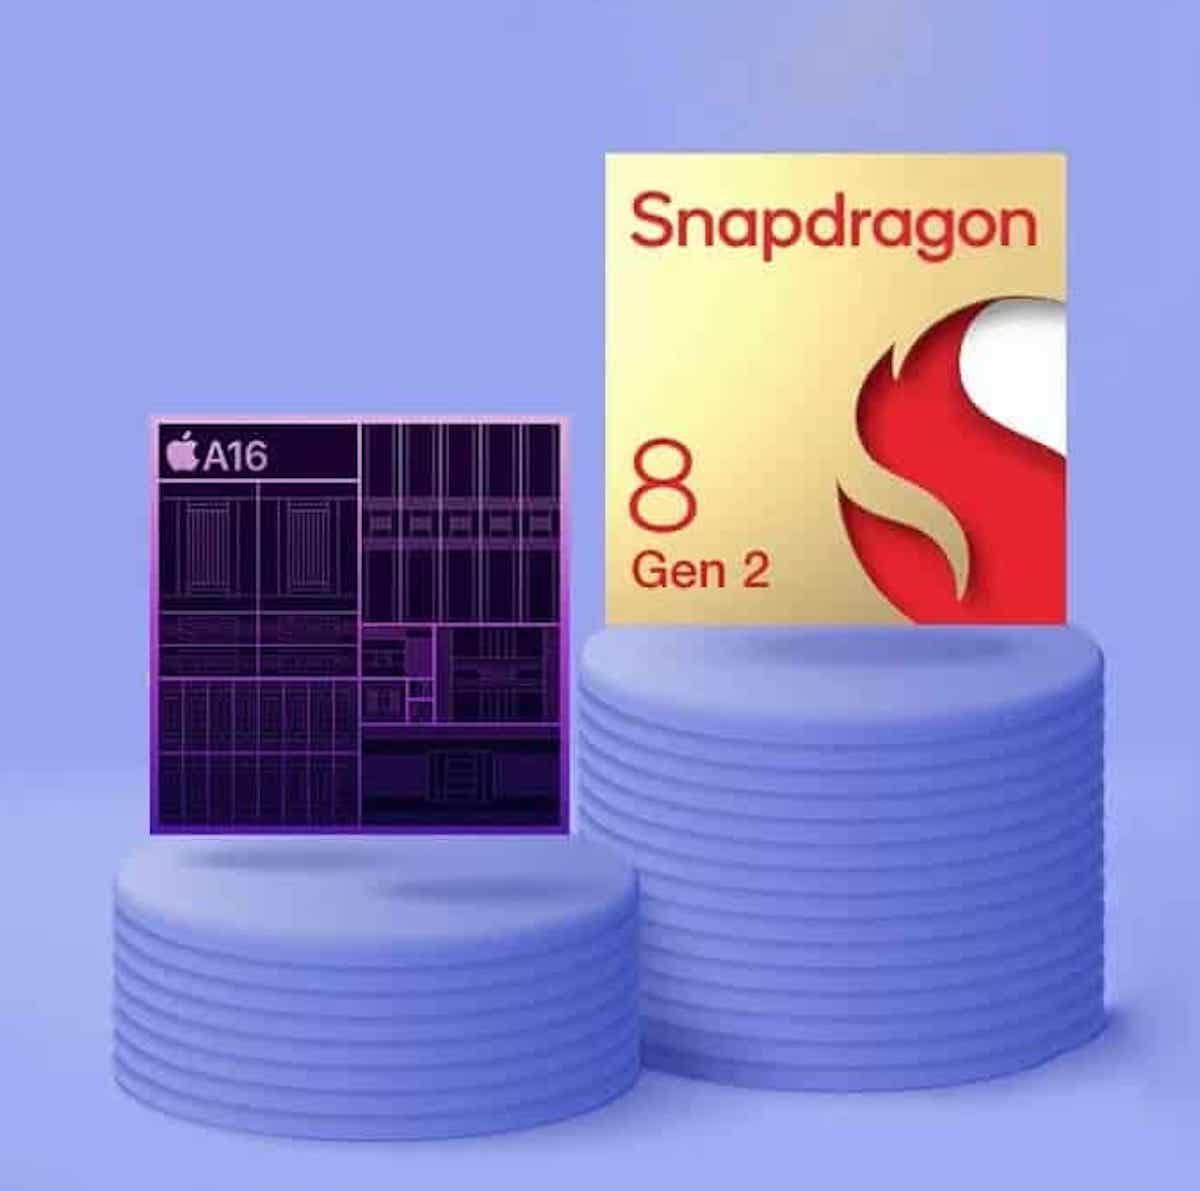 a16-bionic-and-snapdragon-8-gen-2